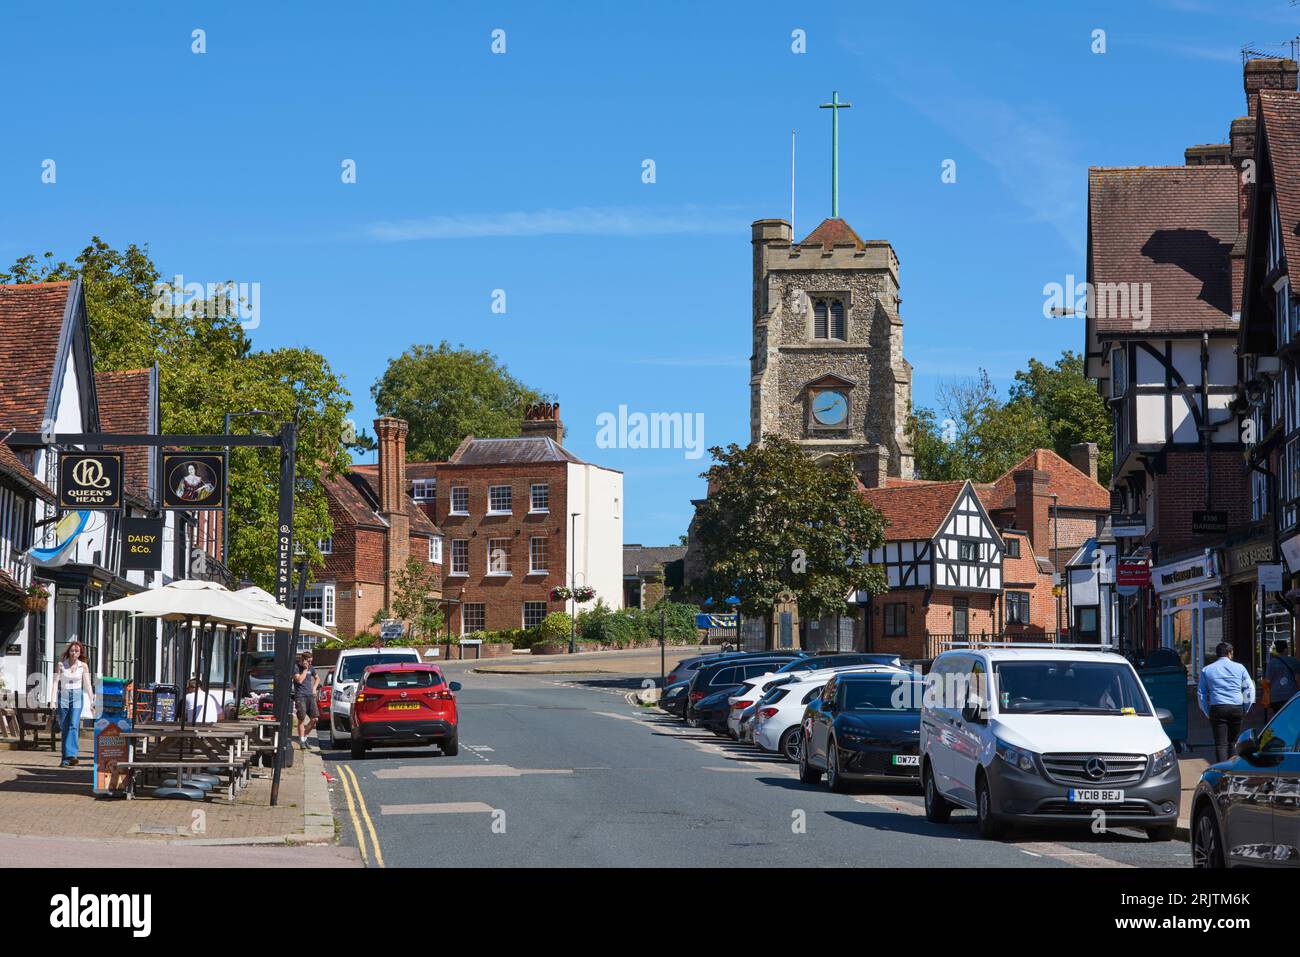 The High Street at Pinner Village, Middlesex, Greater London UK, looking towards Pinner church Stock Photo